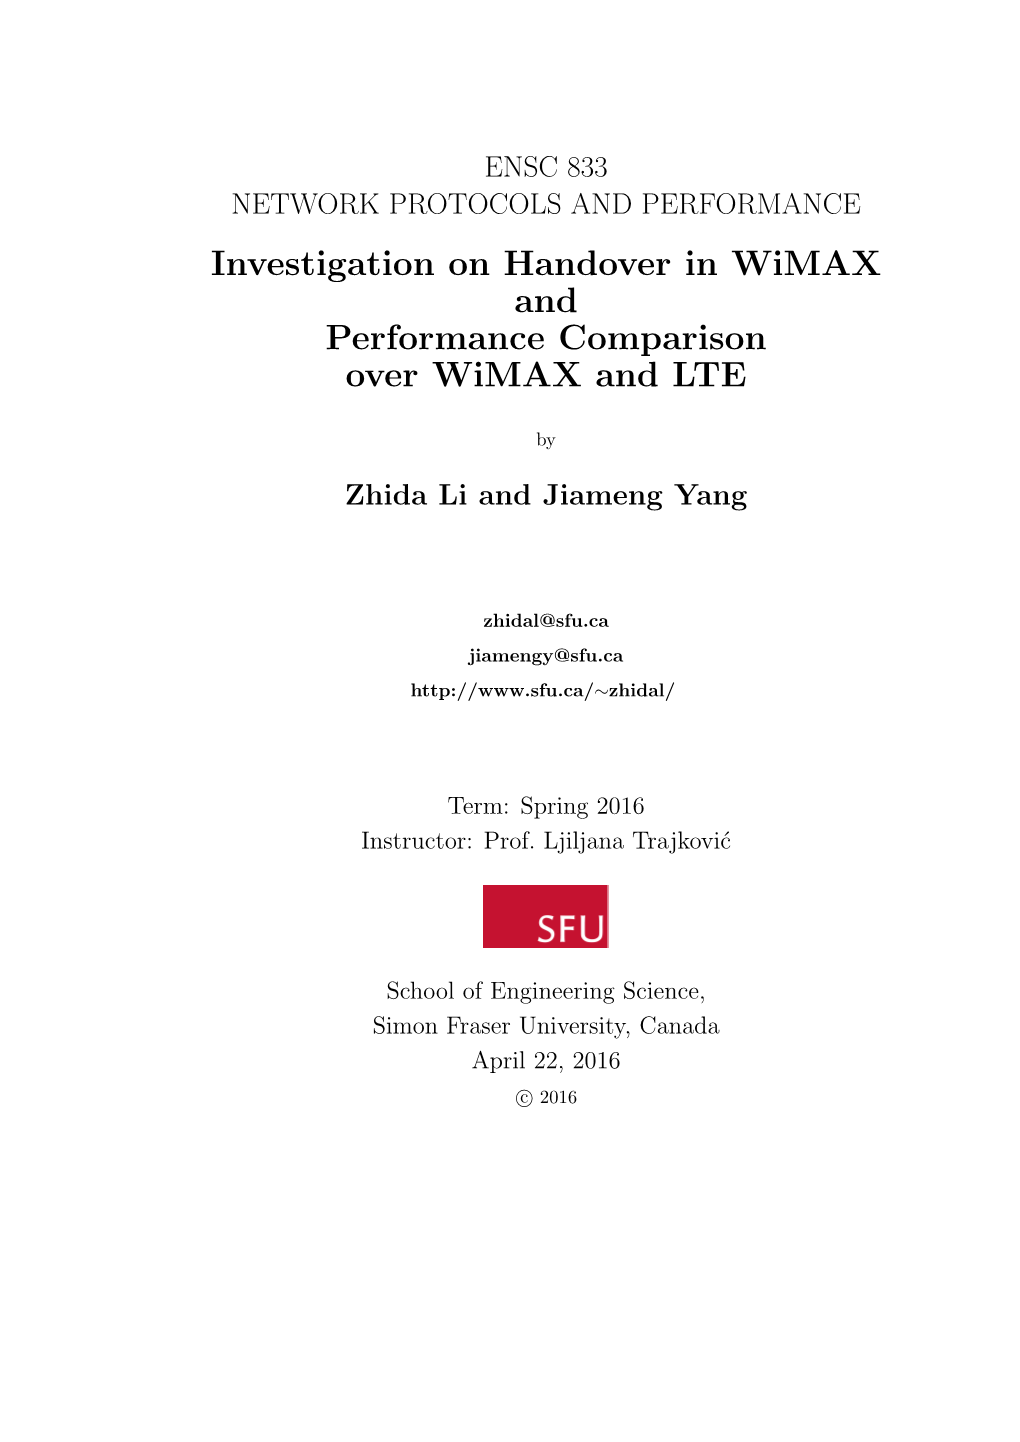 Investigation on Handover in Wimax and Performance Comparison Over Wimax and LTE